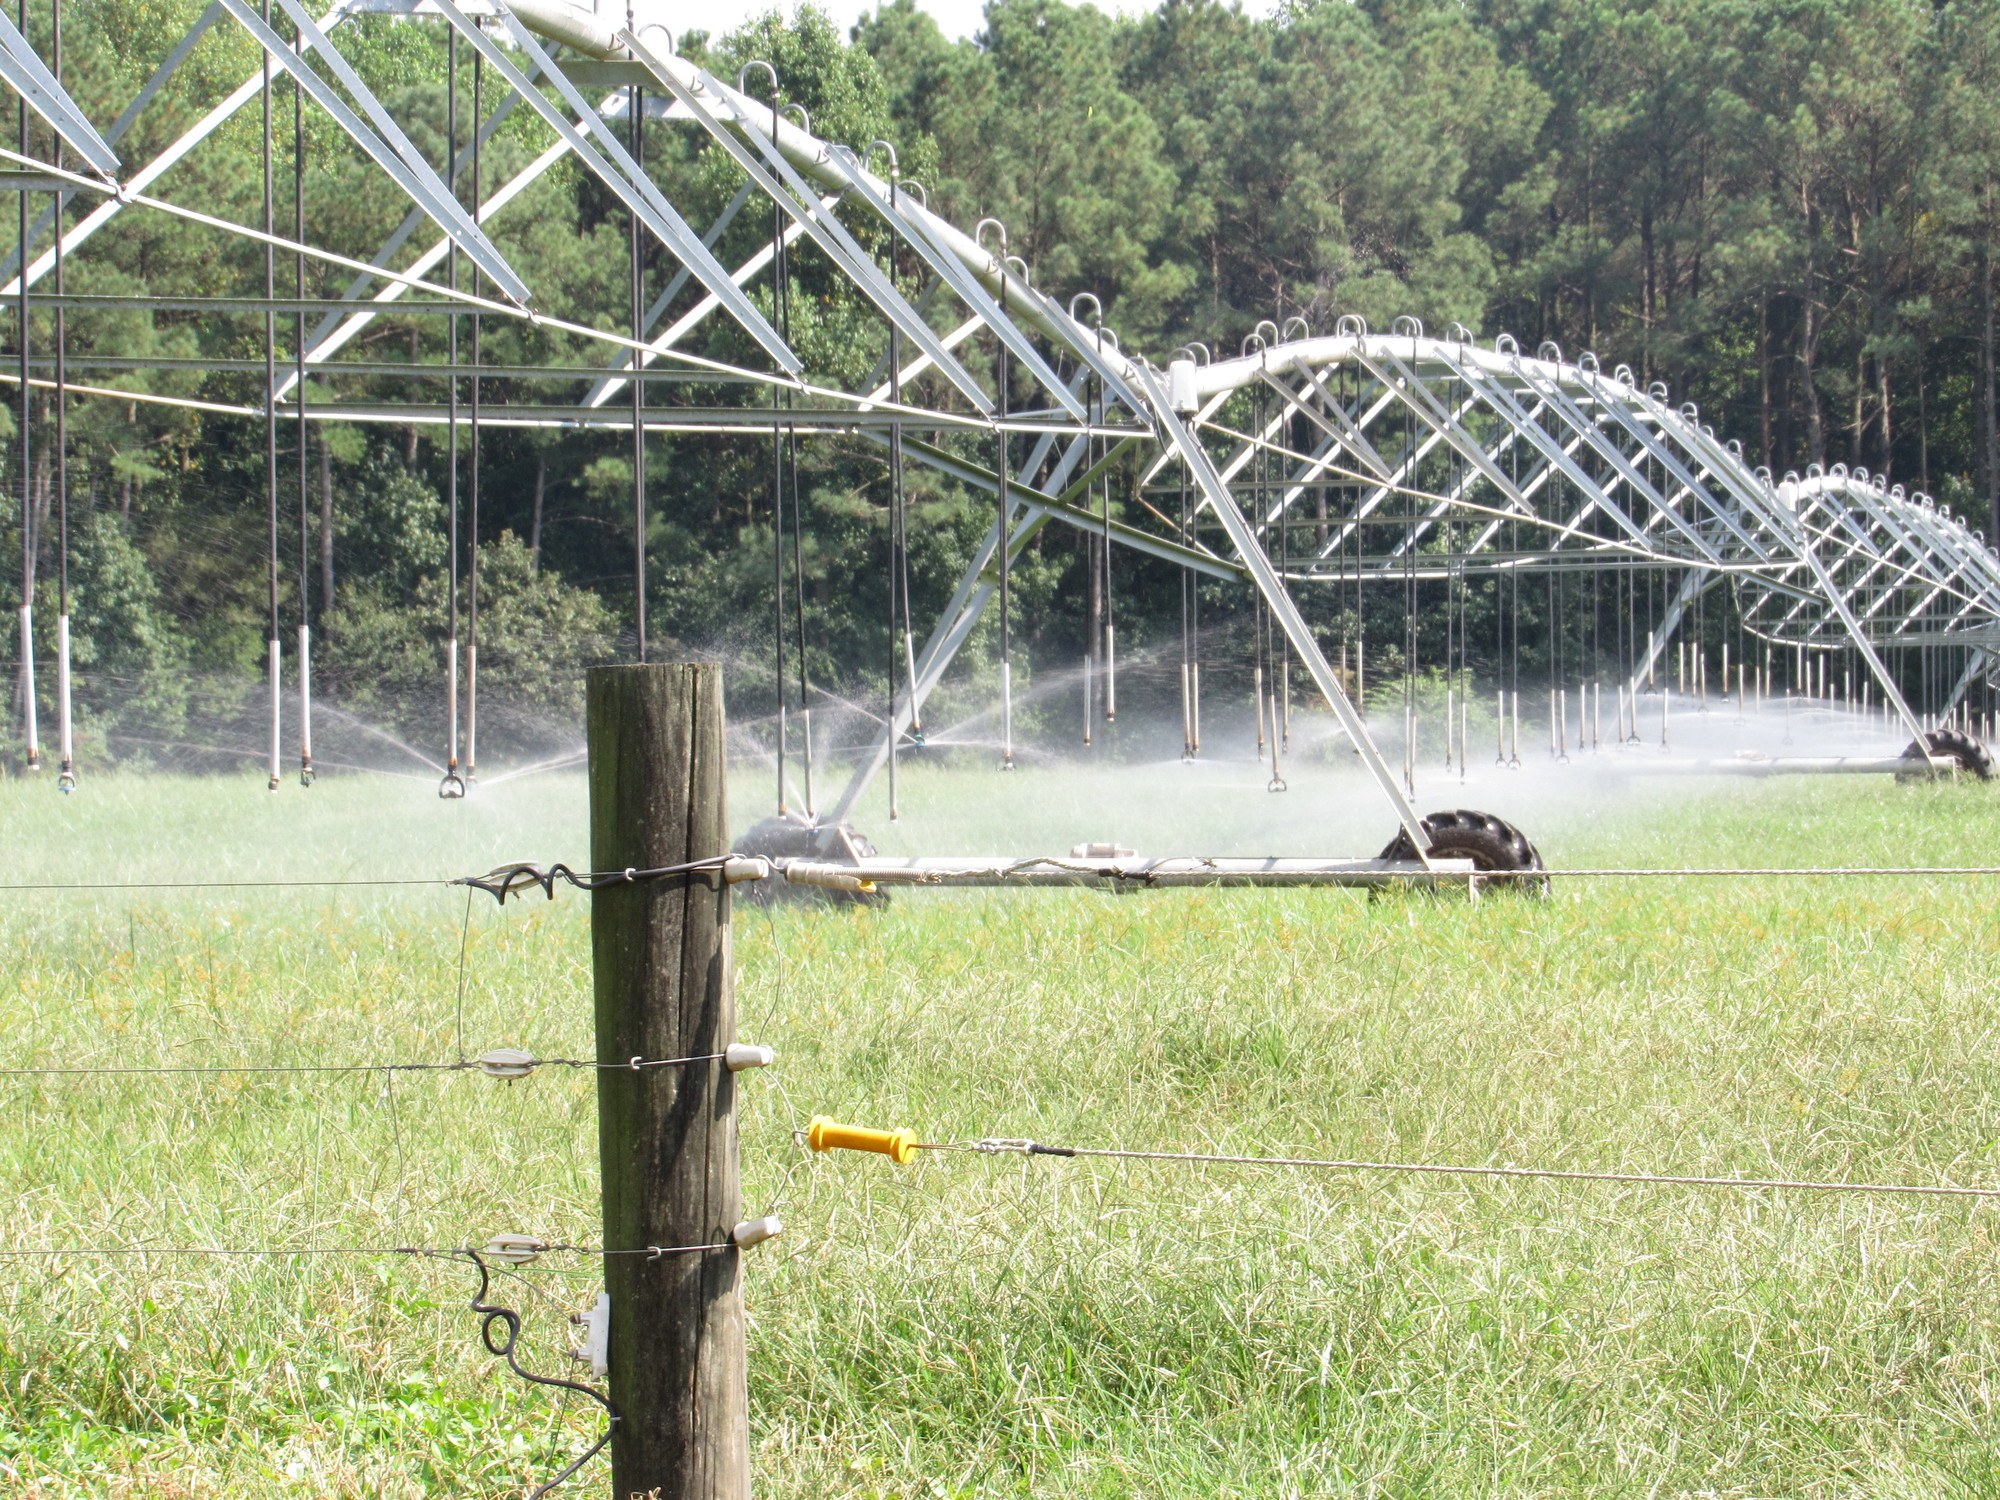 CAFO waste water being sprayed on a nearby field. April 2022